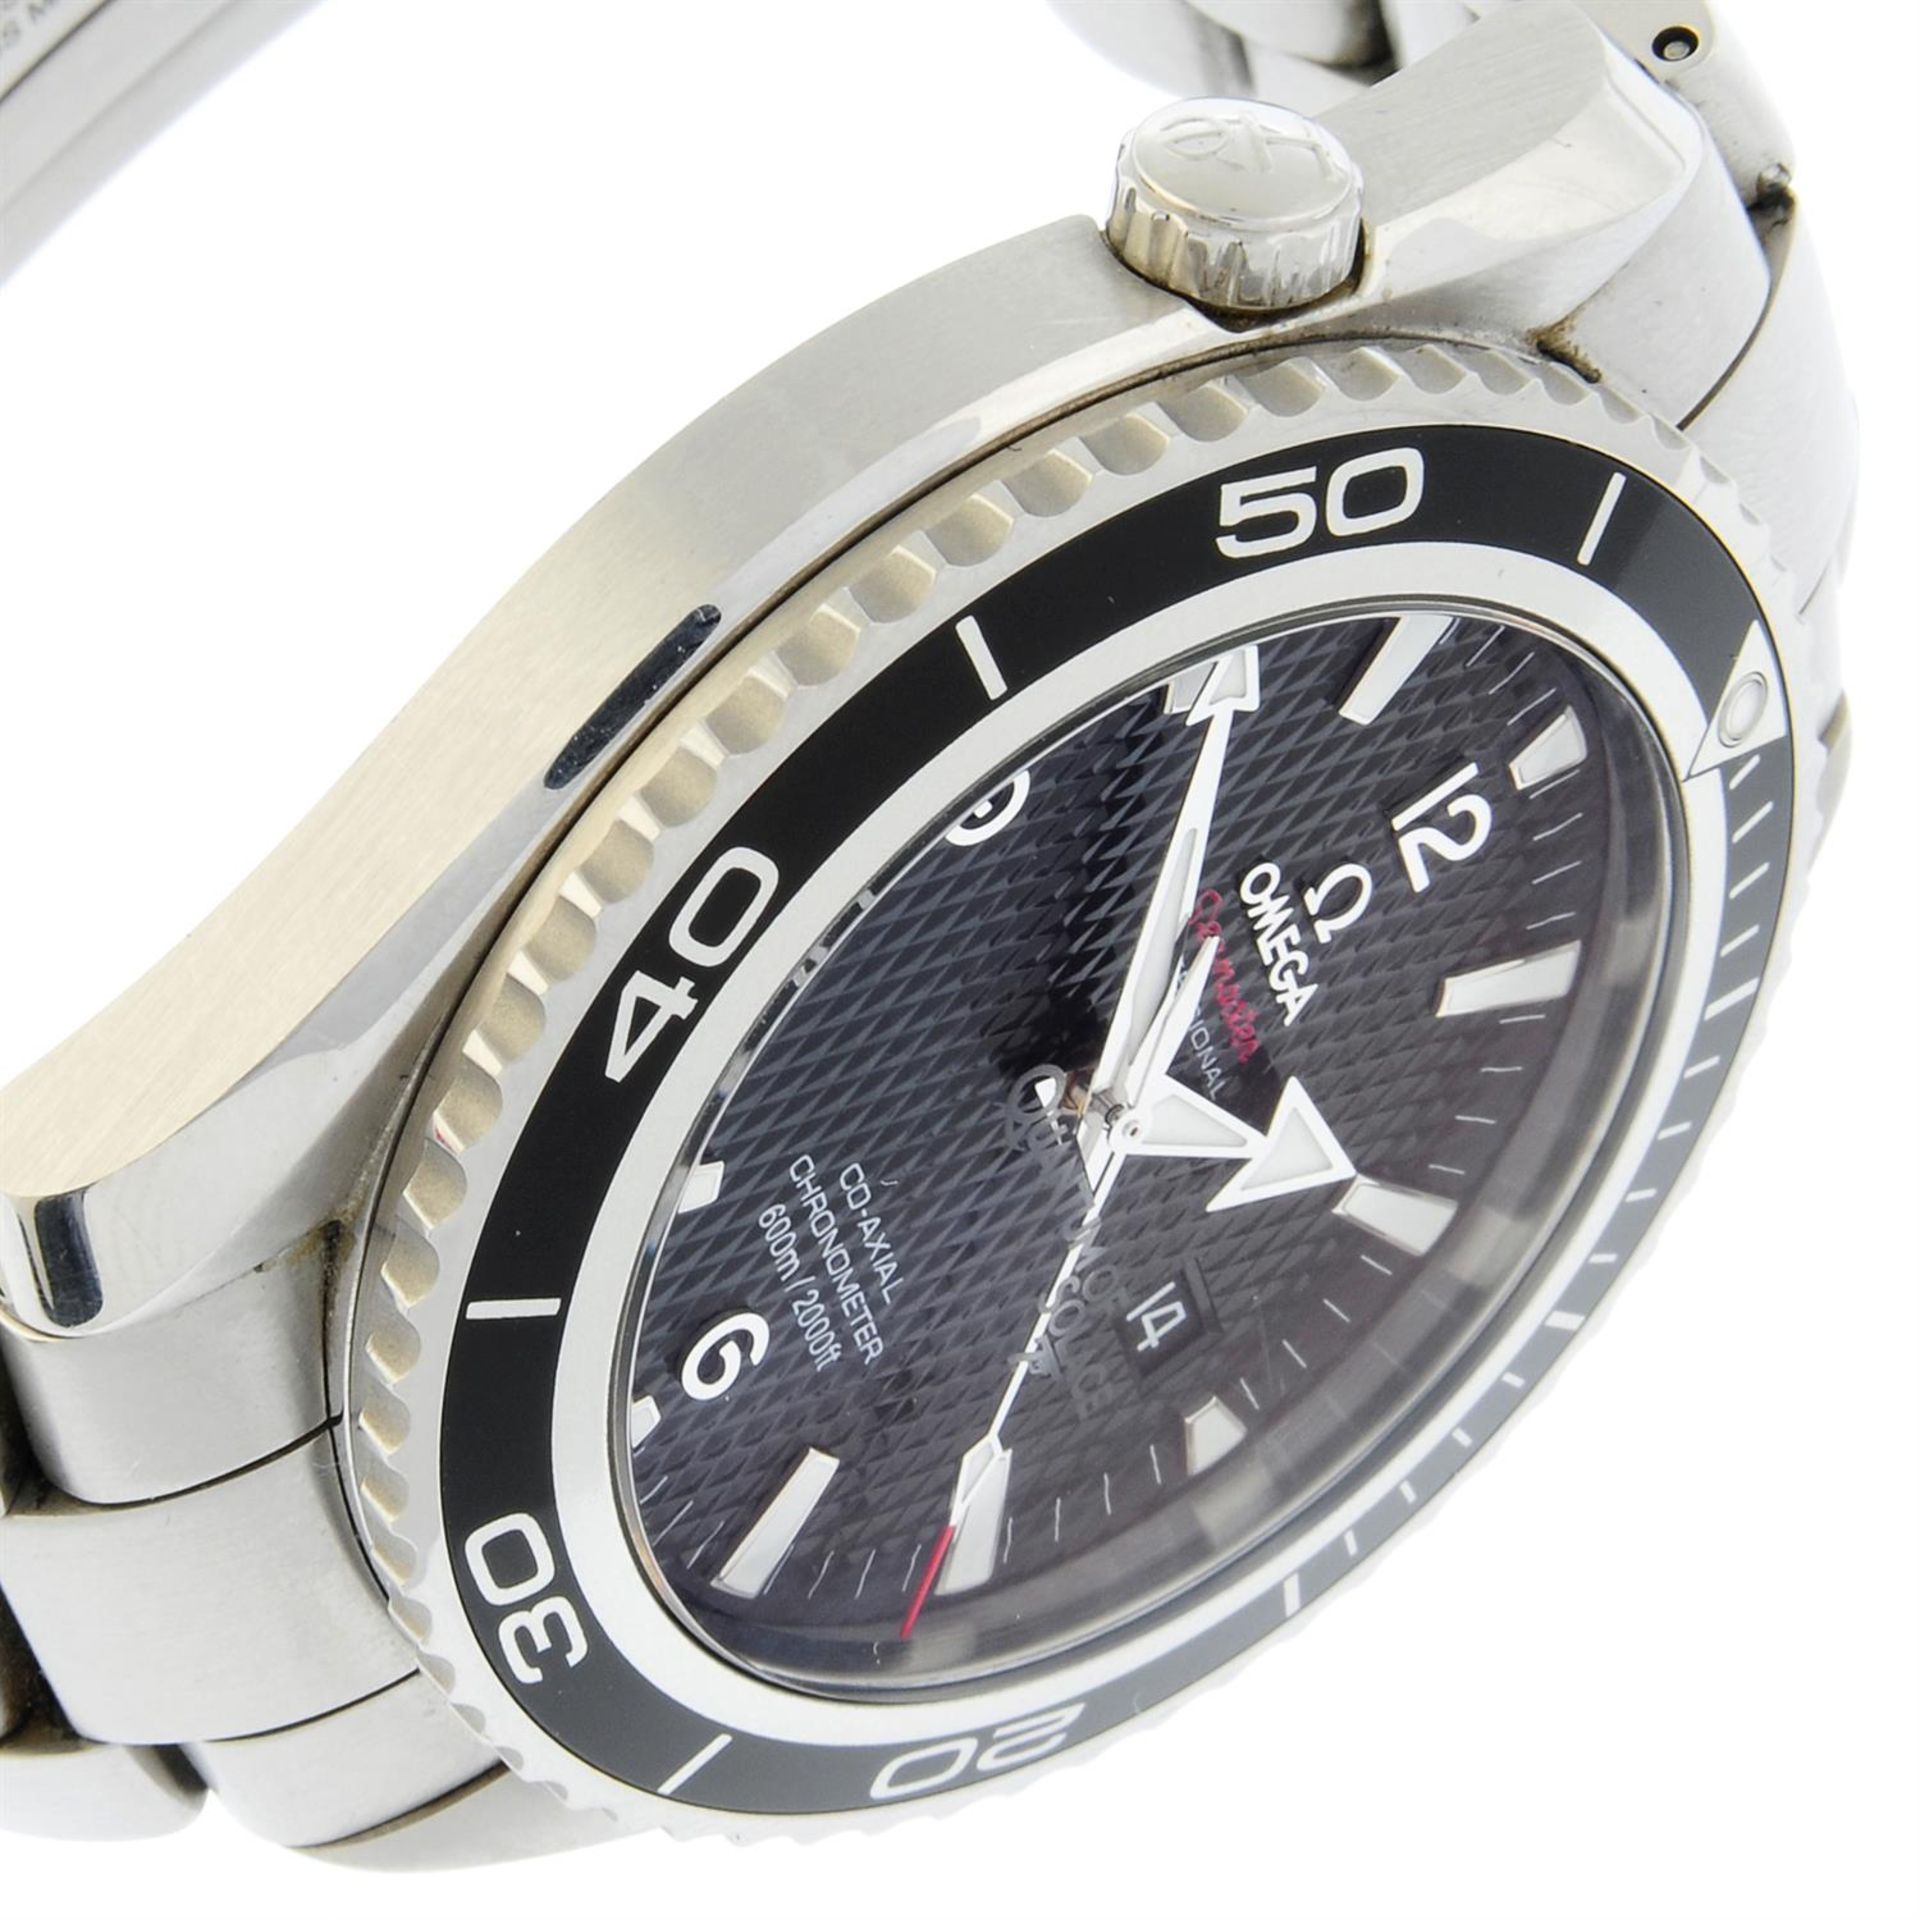 Omega - a Seamaster Planet Ocean watch, 44mm. - Image 4 of 8